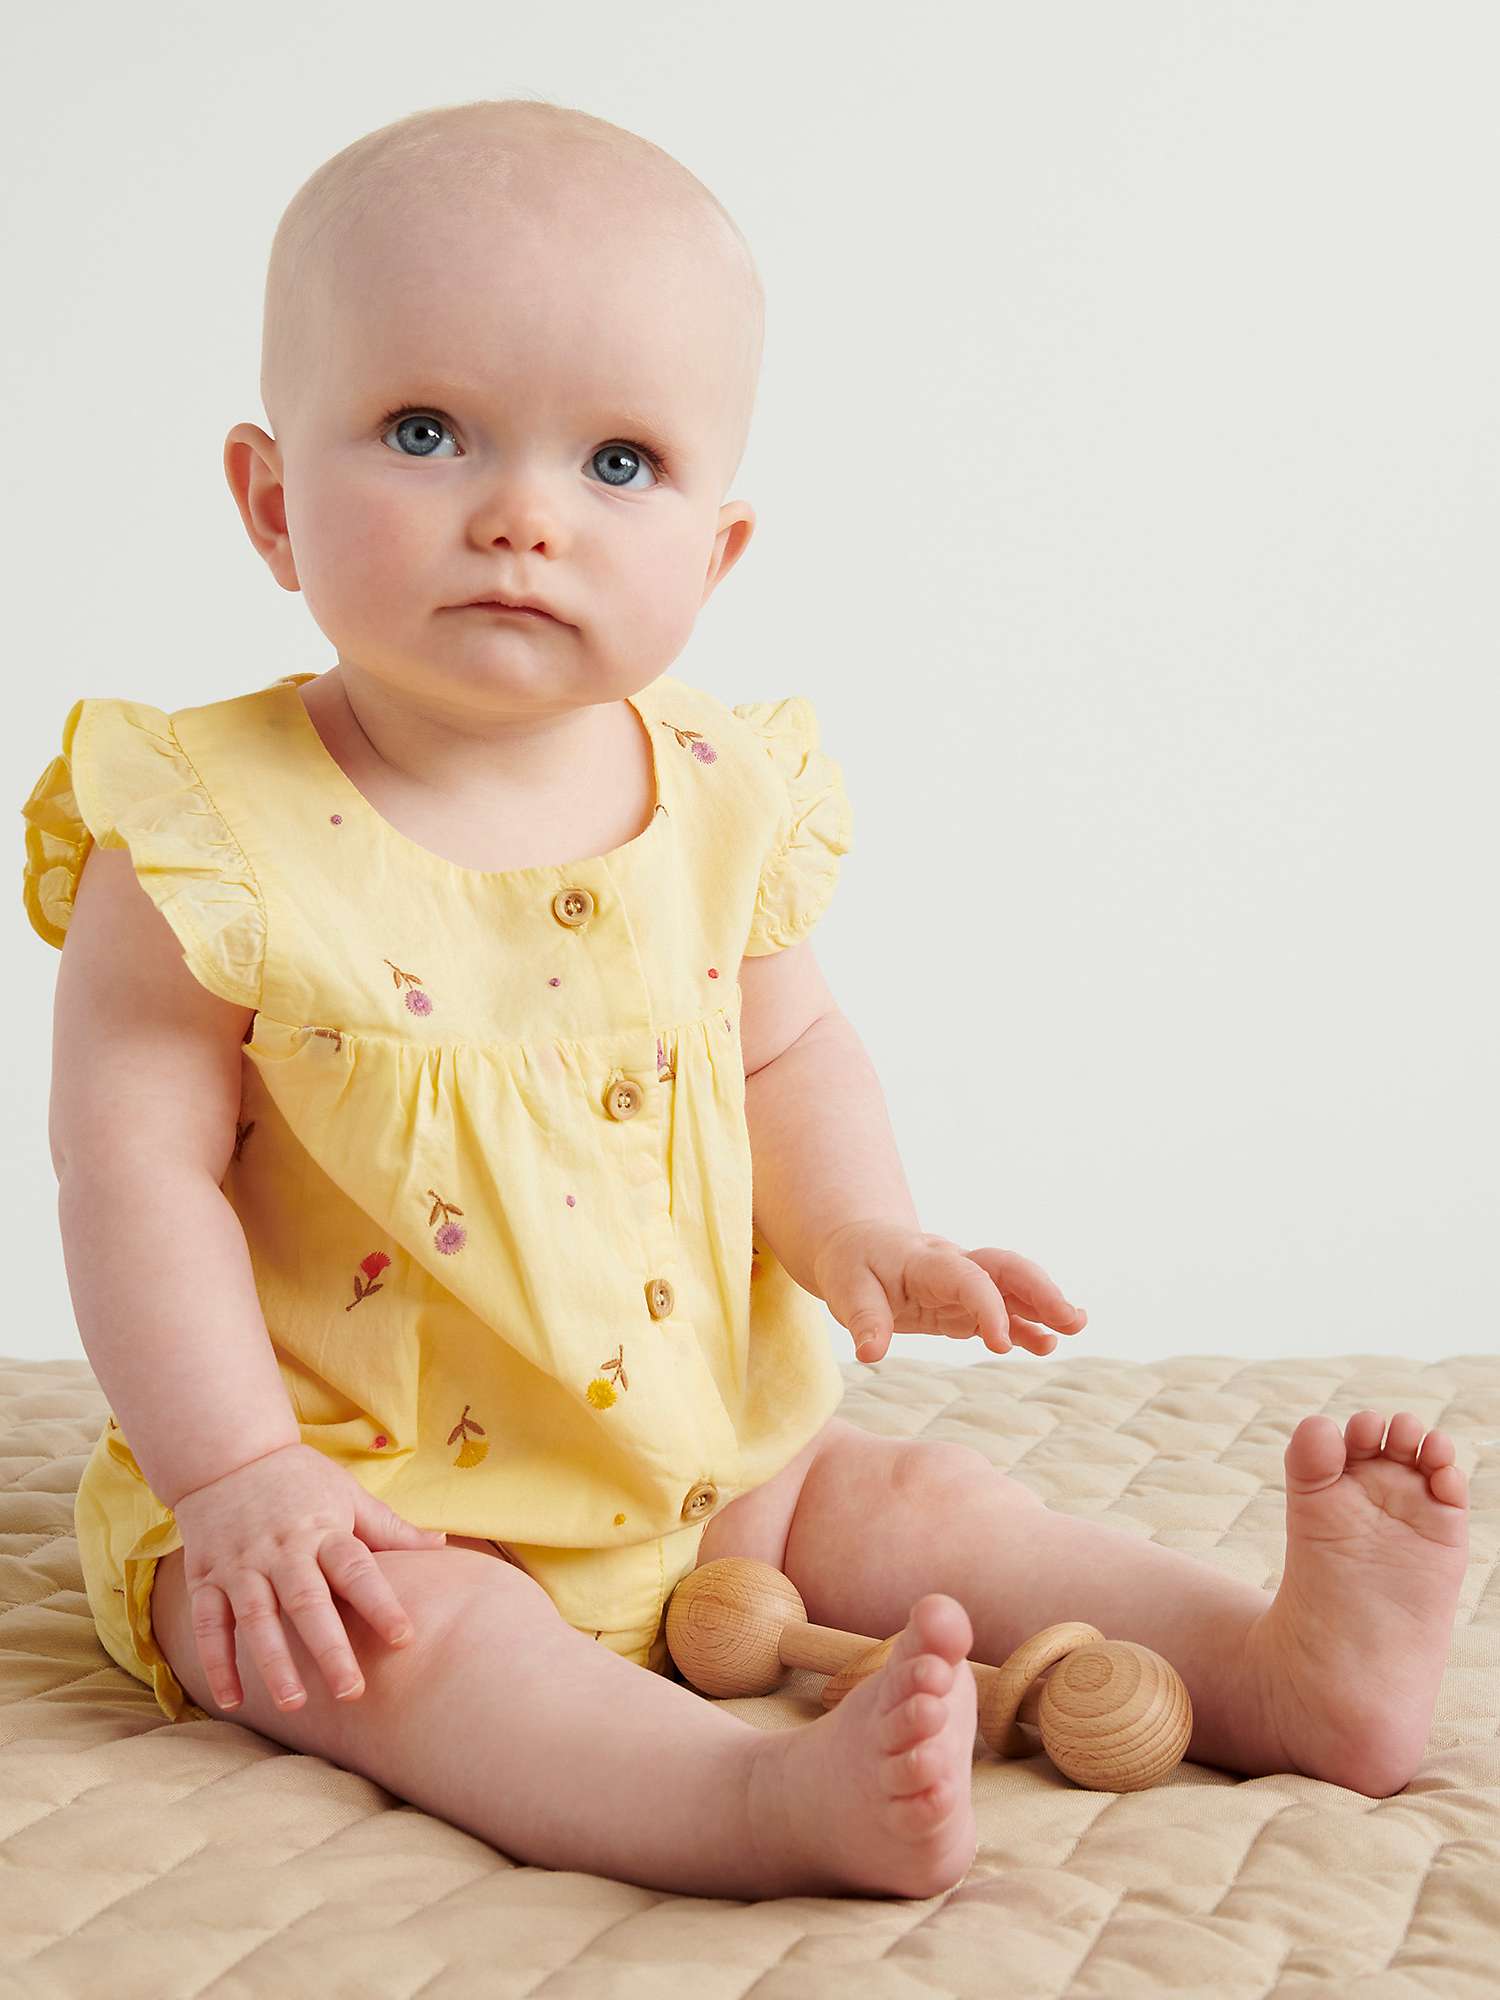 Buy Purebaby Baby Organic Cotton Embroided Floral Bodysuit, Tufted Floral Online at johnlewis.com